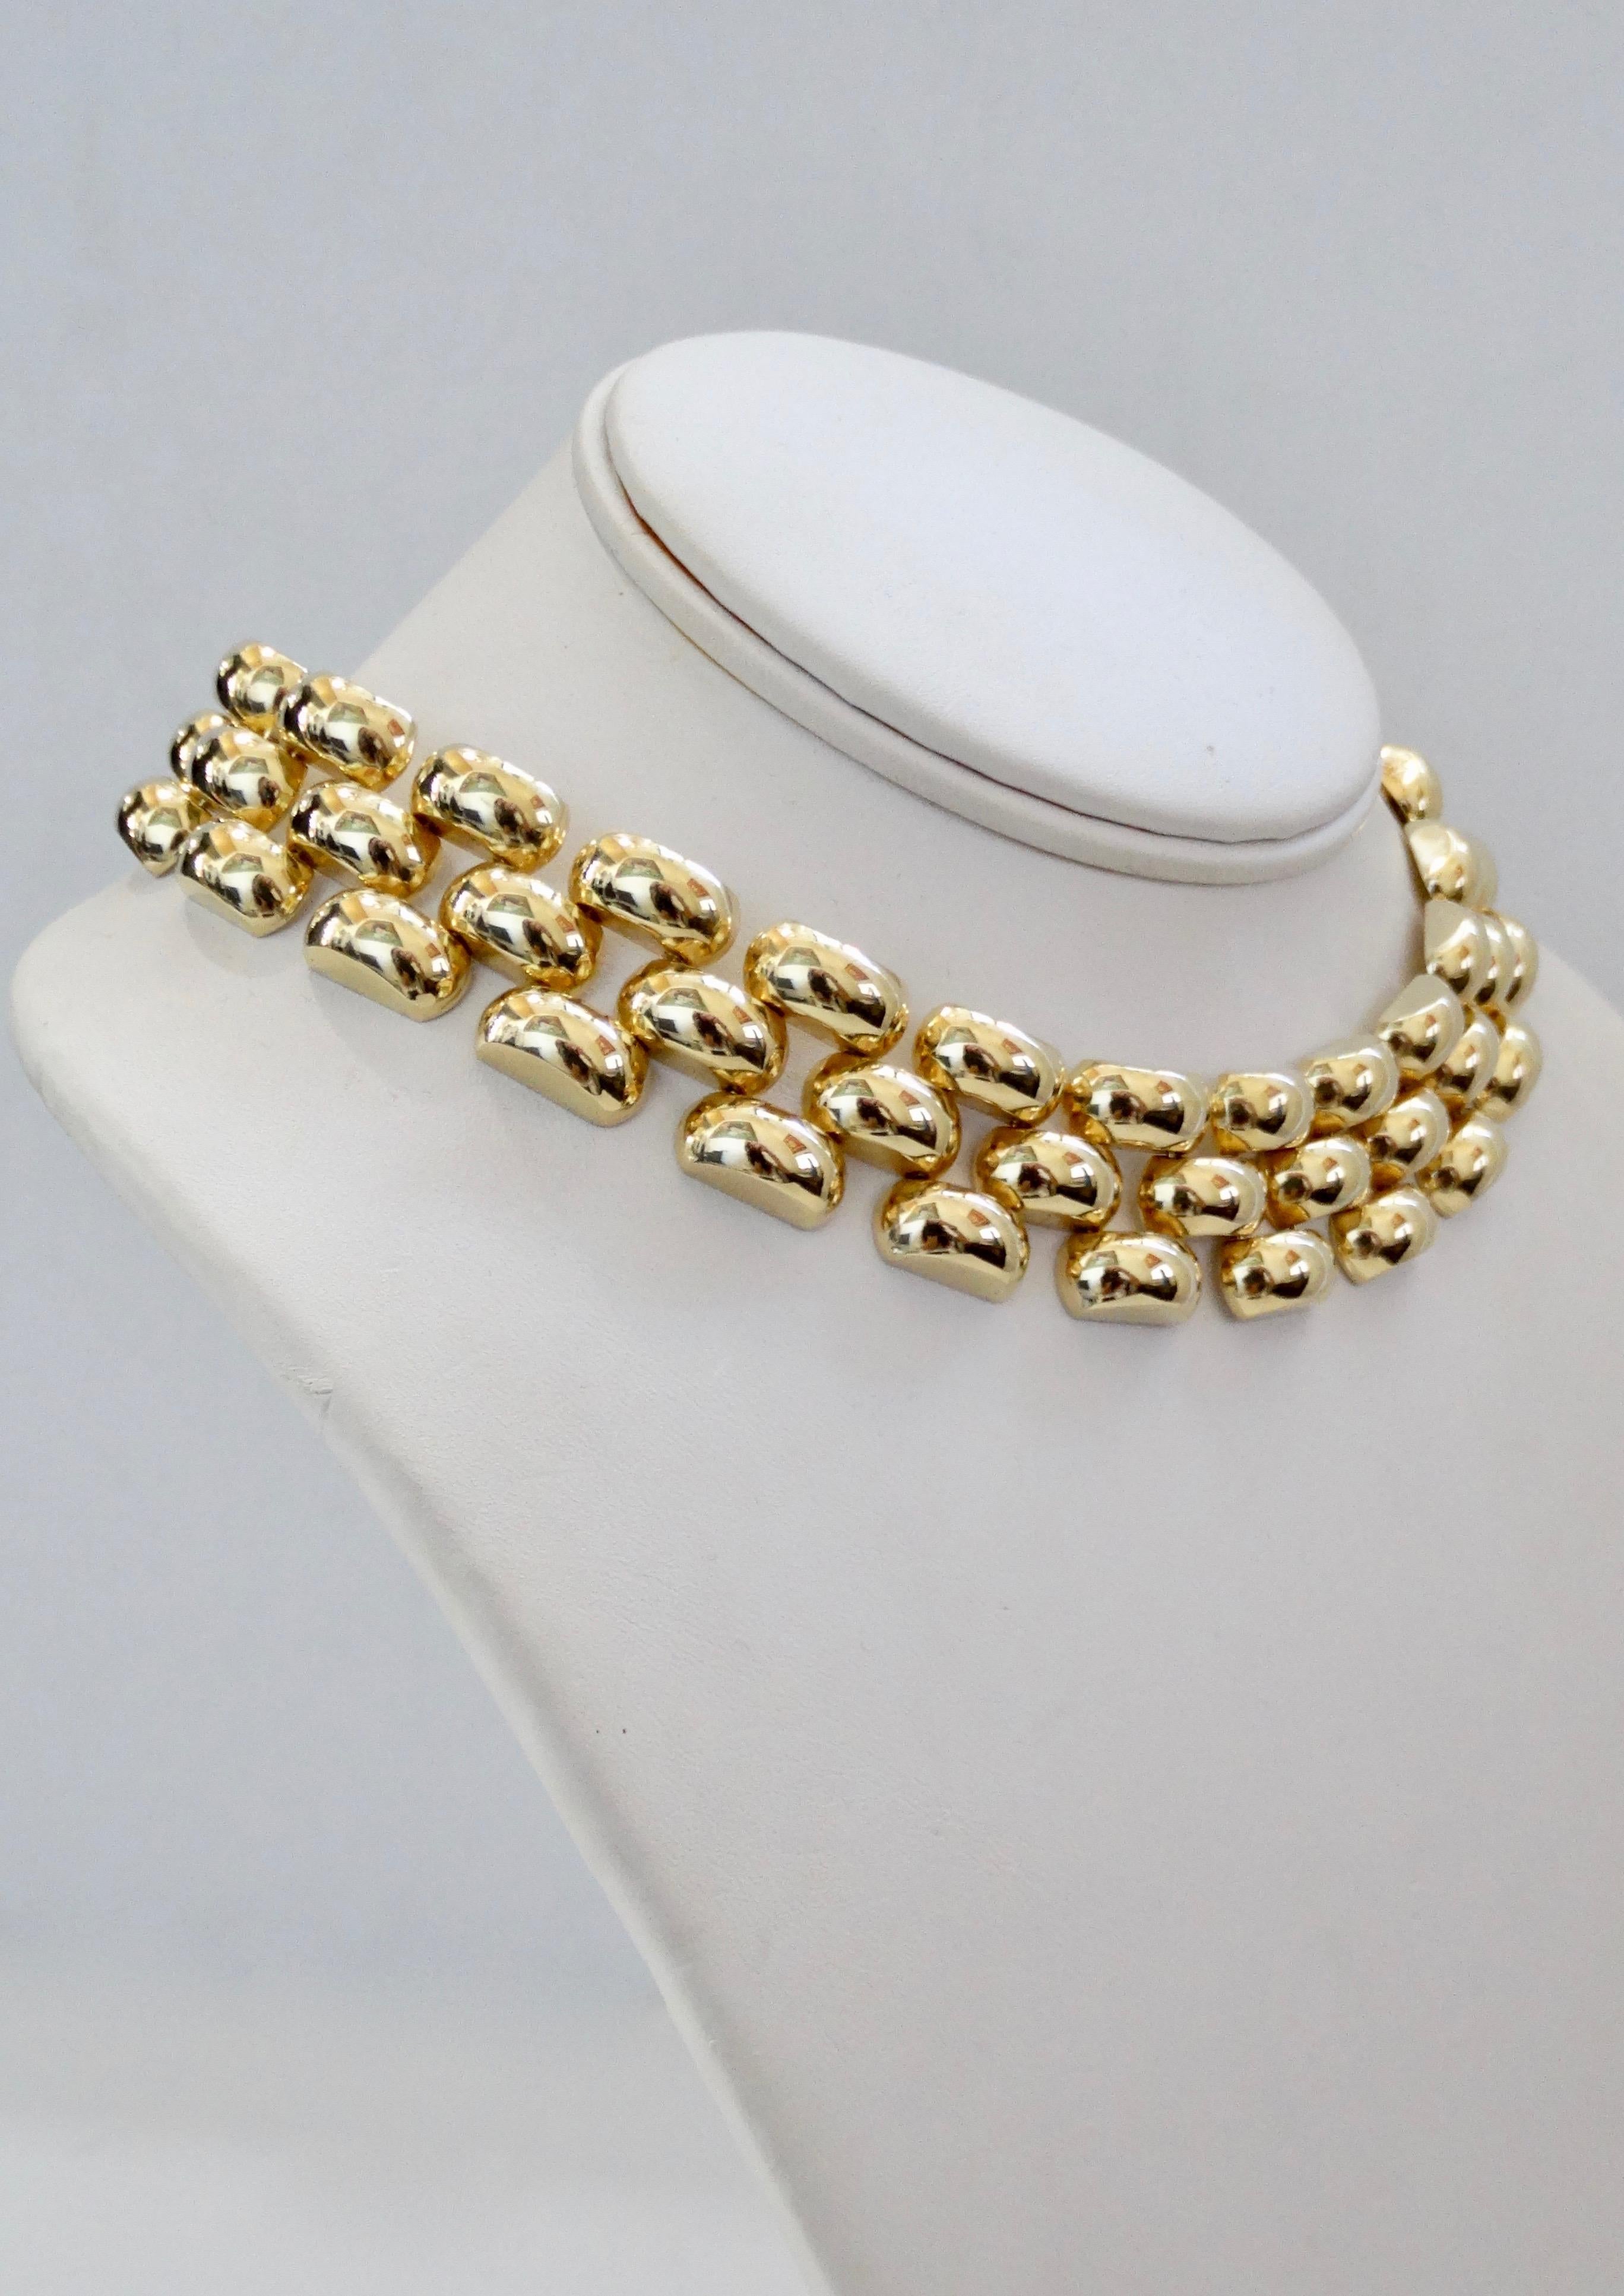  Collar Necklace 14k Yellow Gold Flexible Panther Link In Good Condition For Sale In Scottsdale, AZ